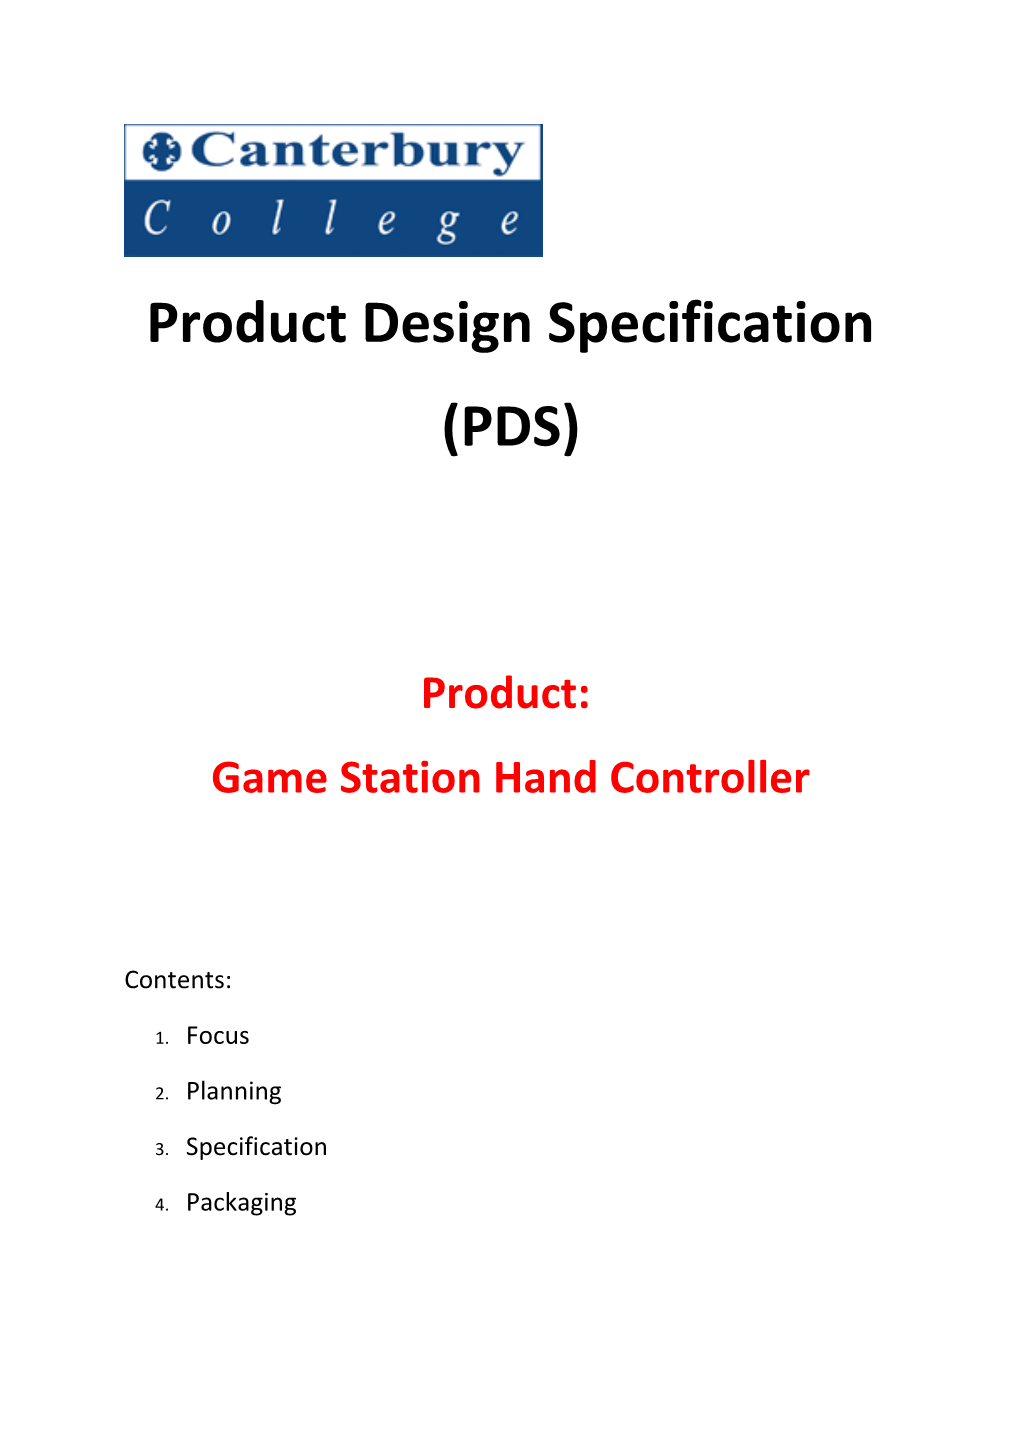 Game Station Hand Controller